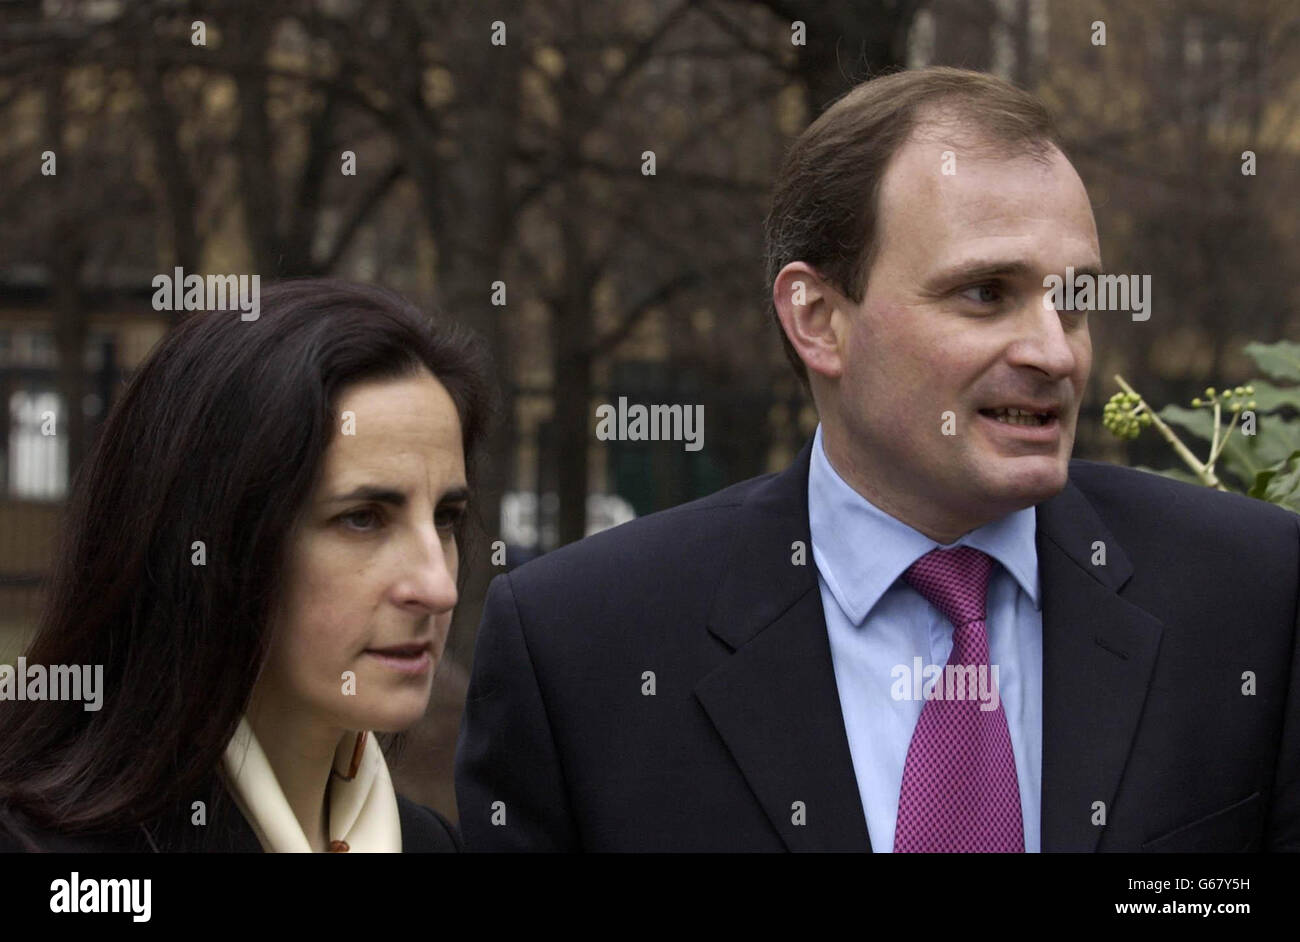 Major Charles Ingram, 39, arrives at Southwark Crown Court in London, with wife Diana, 38, where they are facing charges of cheating on the TV game show 'Who wants to be a millionaire'. * Charles Ingram and his nursery nurse wife Diana, both of High Street, Easterton, Wiltshire, and college business studies head Tecwen Whittock, of Heol-y-Gors, Whitchurch, Cardiff, each deny an allegation of procuring a valuable security by deception. Stock Photo